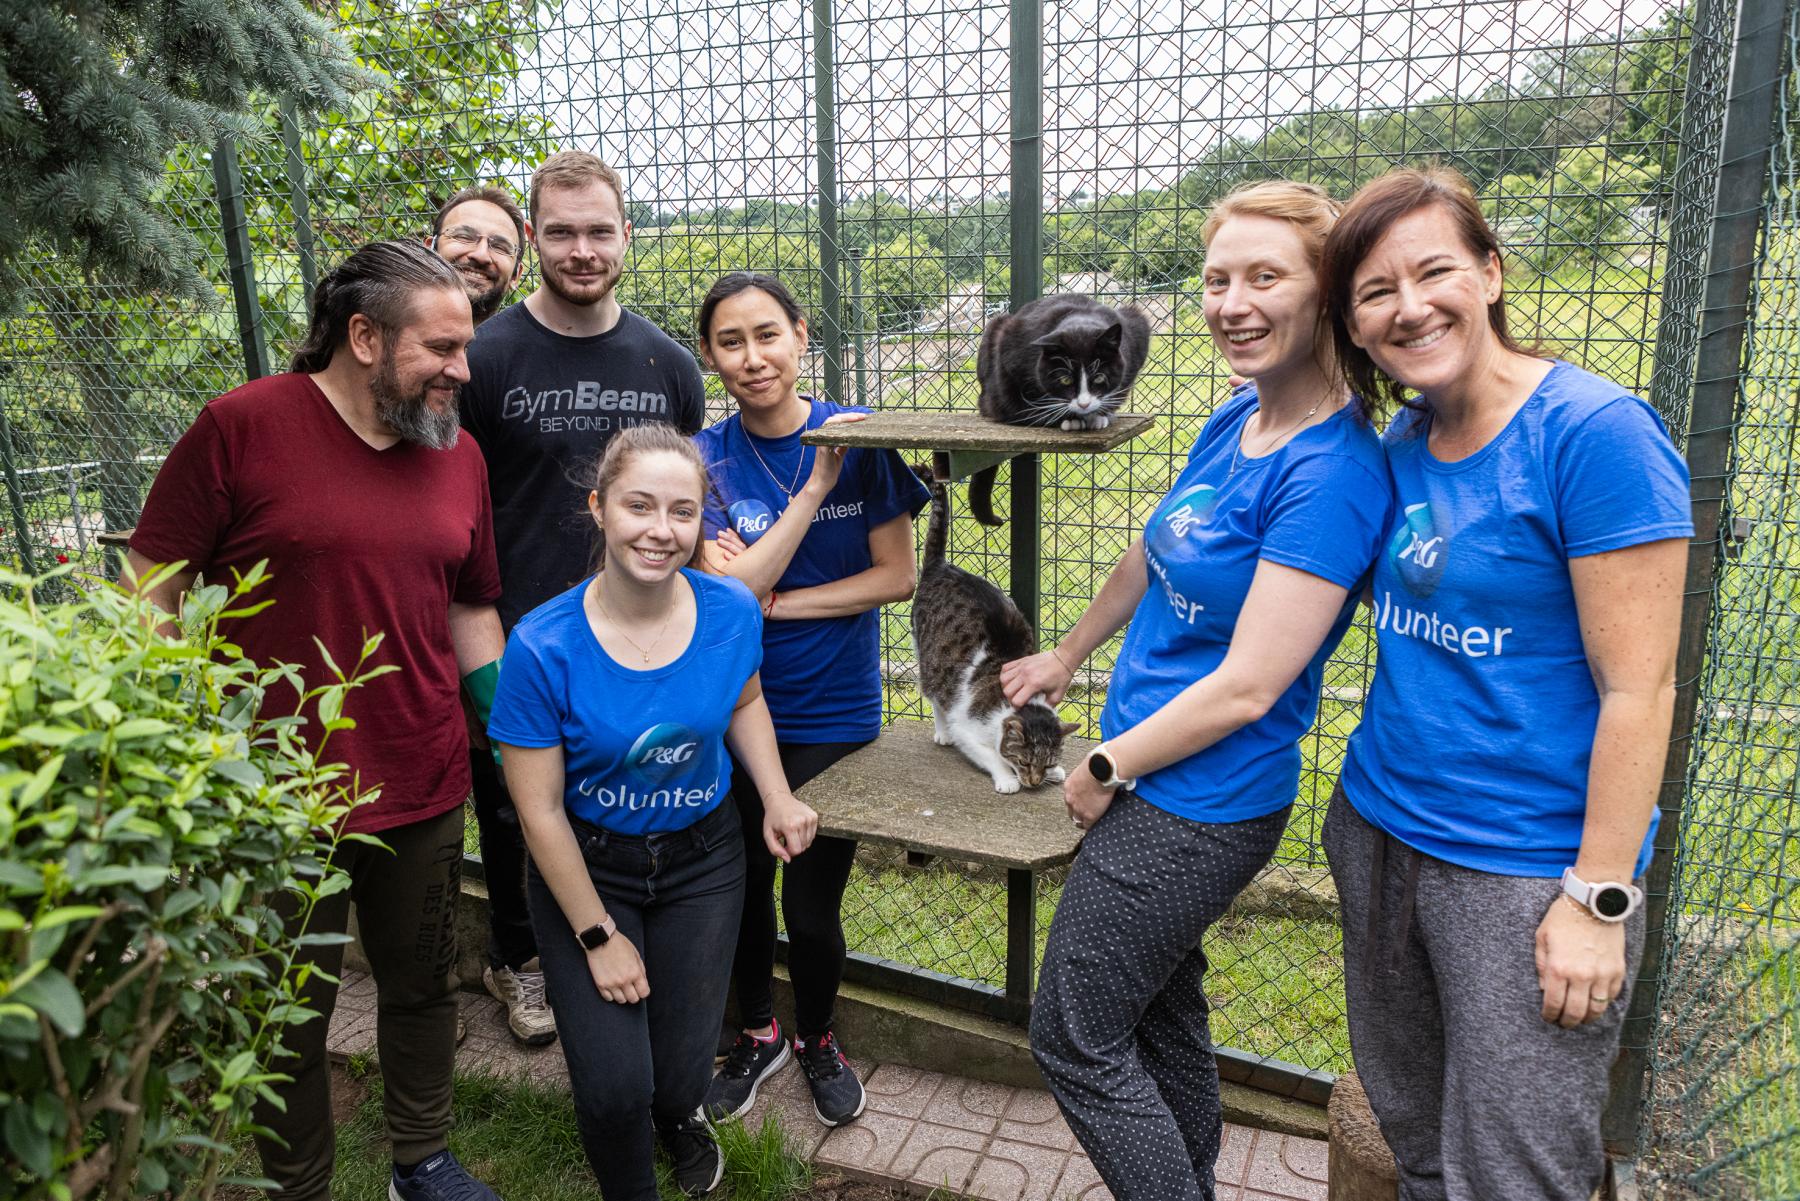 Corporate volunteers worked 1,805 hours on Give & Gain Day this year